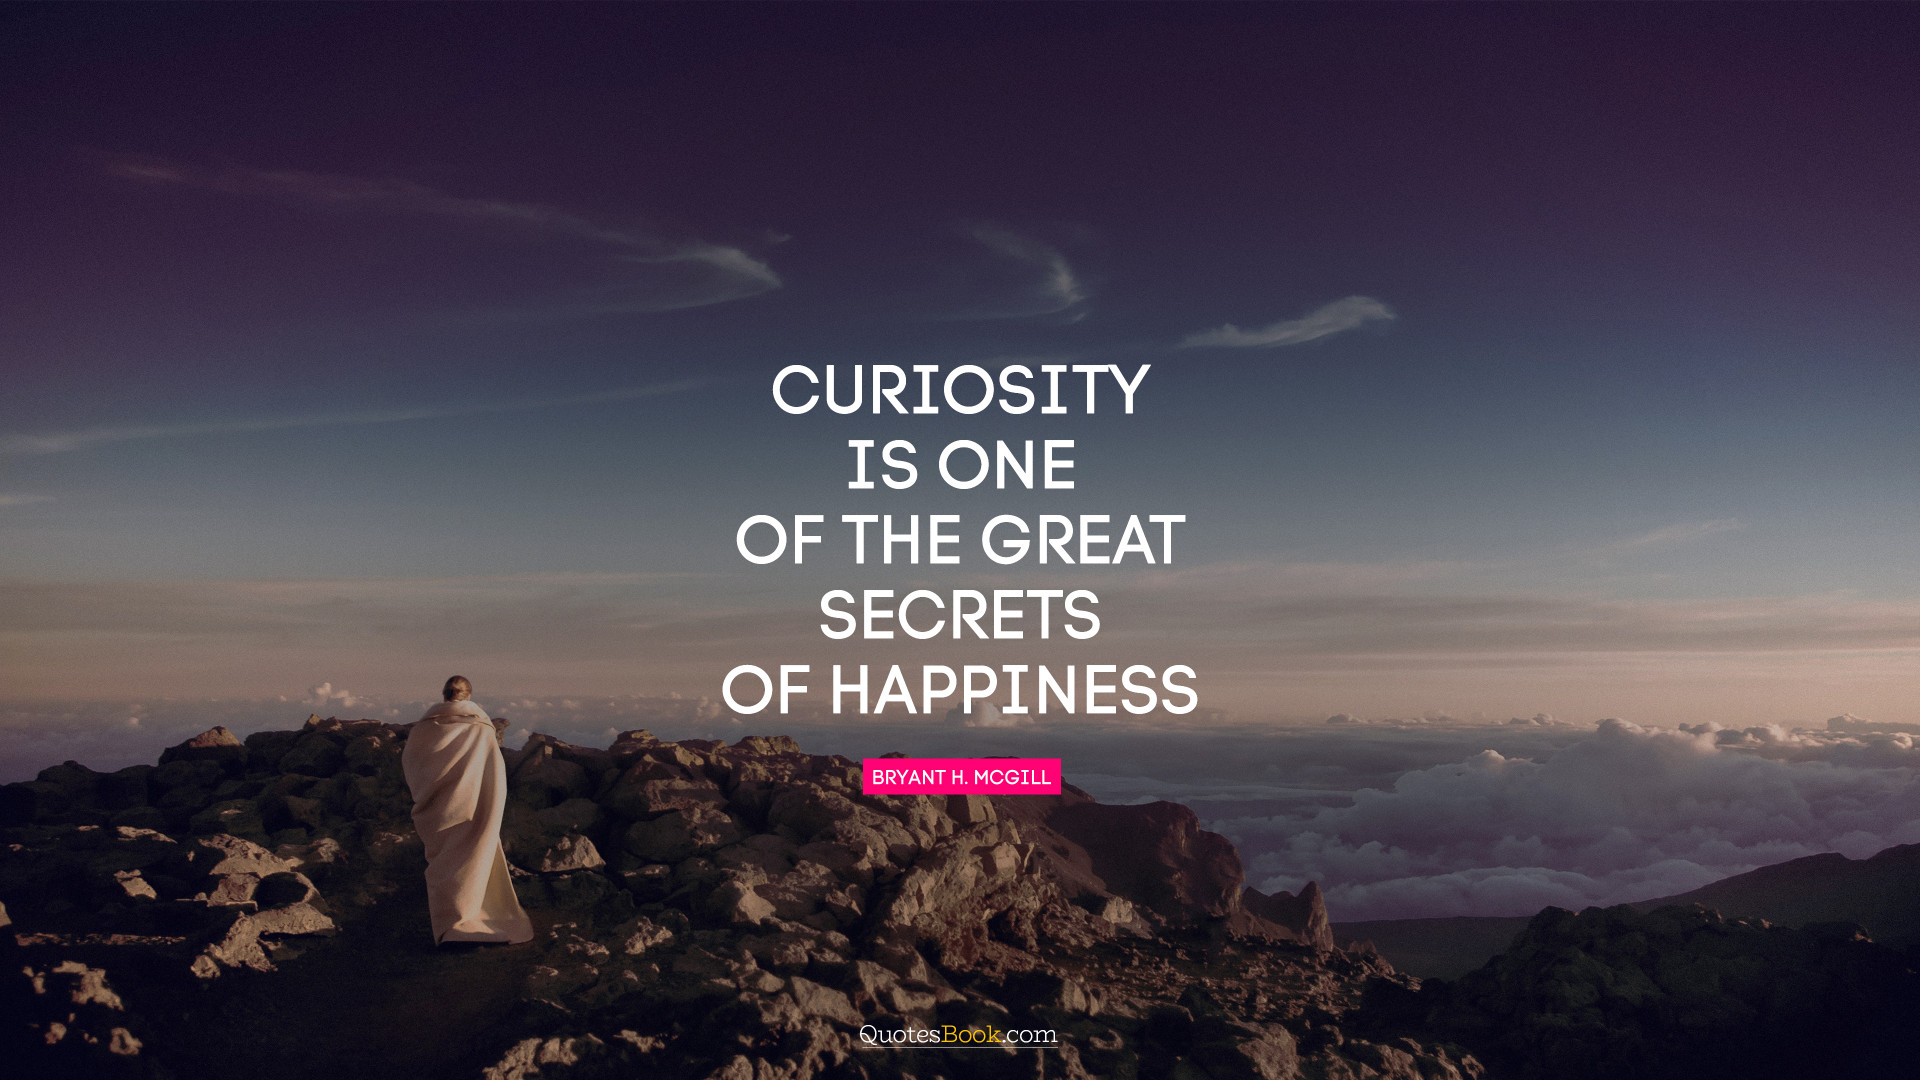 Curiosity is one of the great secrets of happiness. - Quote by Bryant H